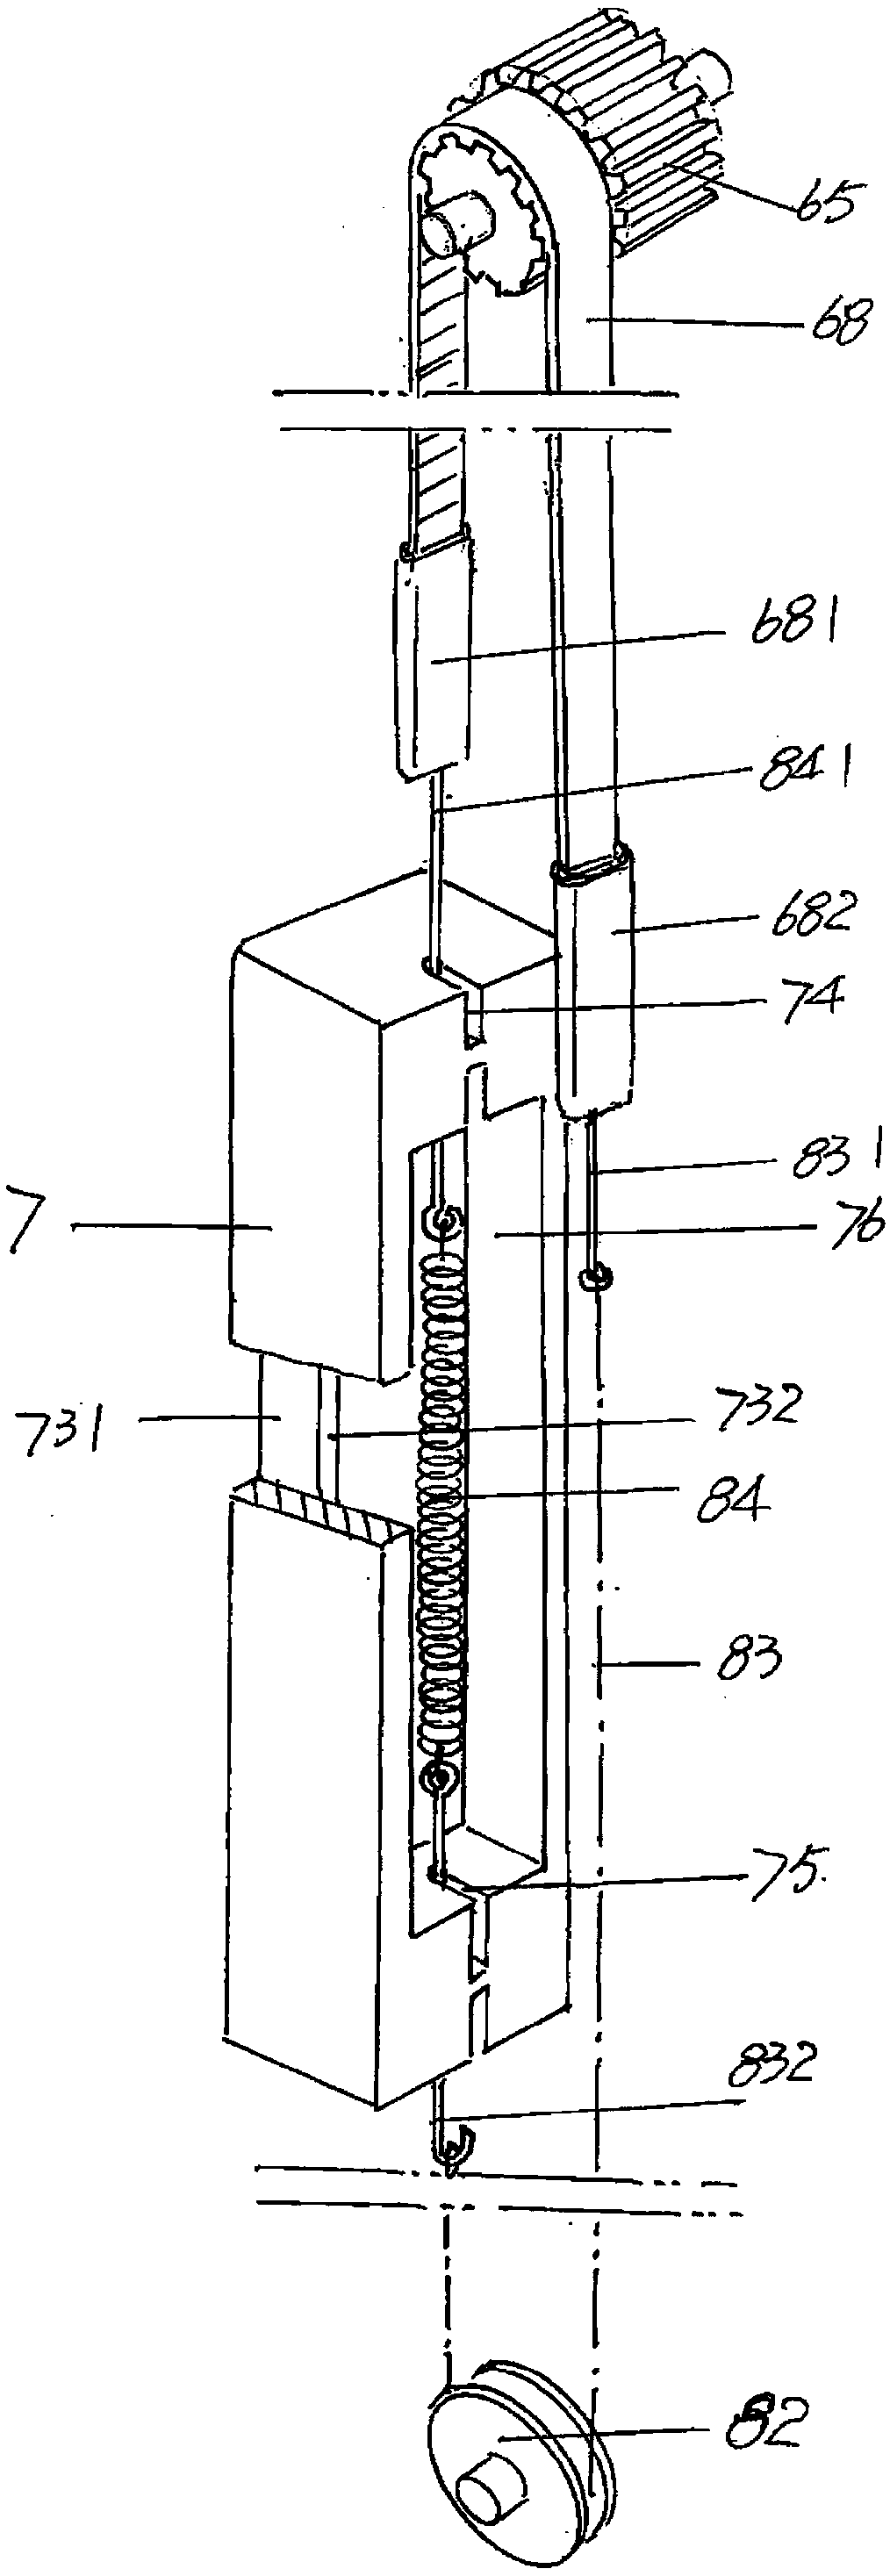 Internal control mechanism for window shutter with built-in hollow glass